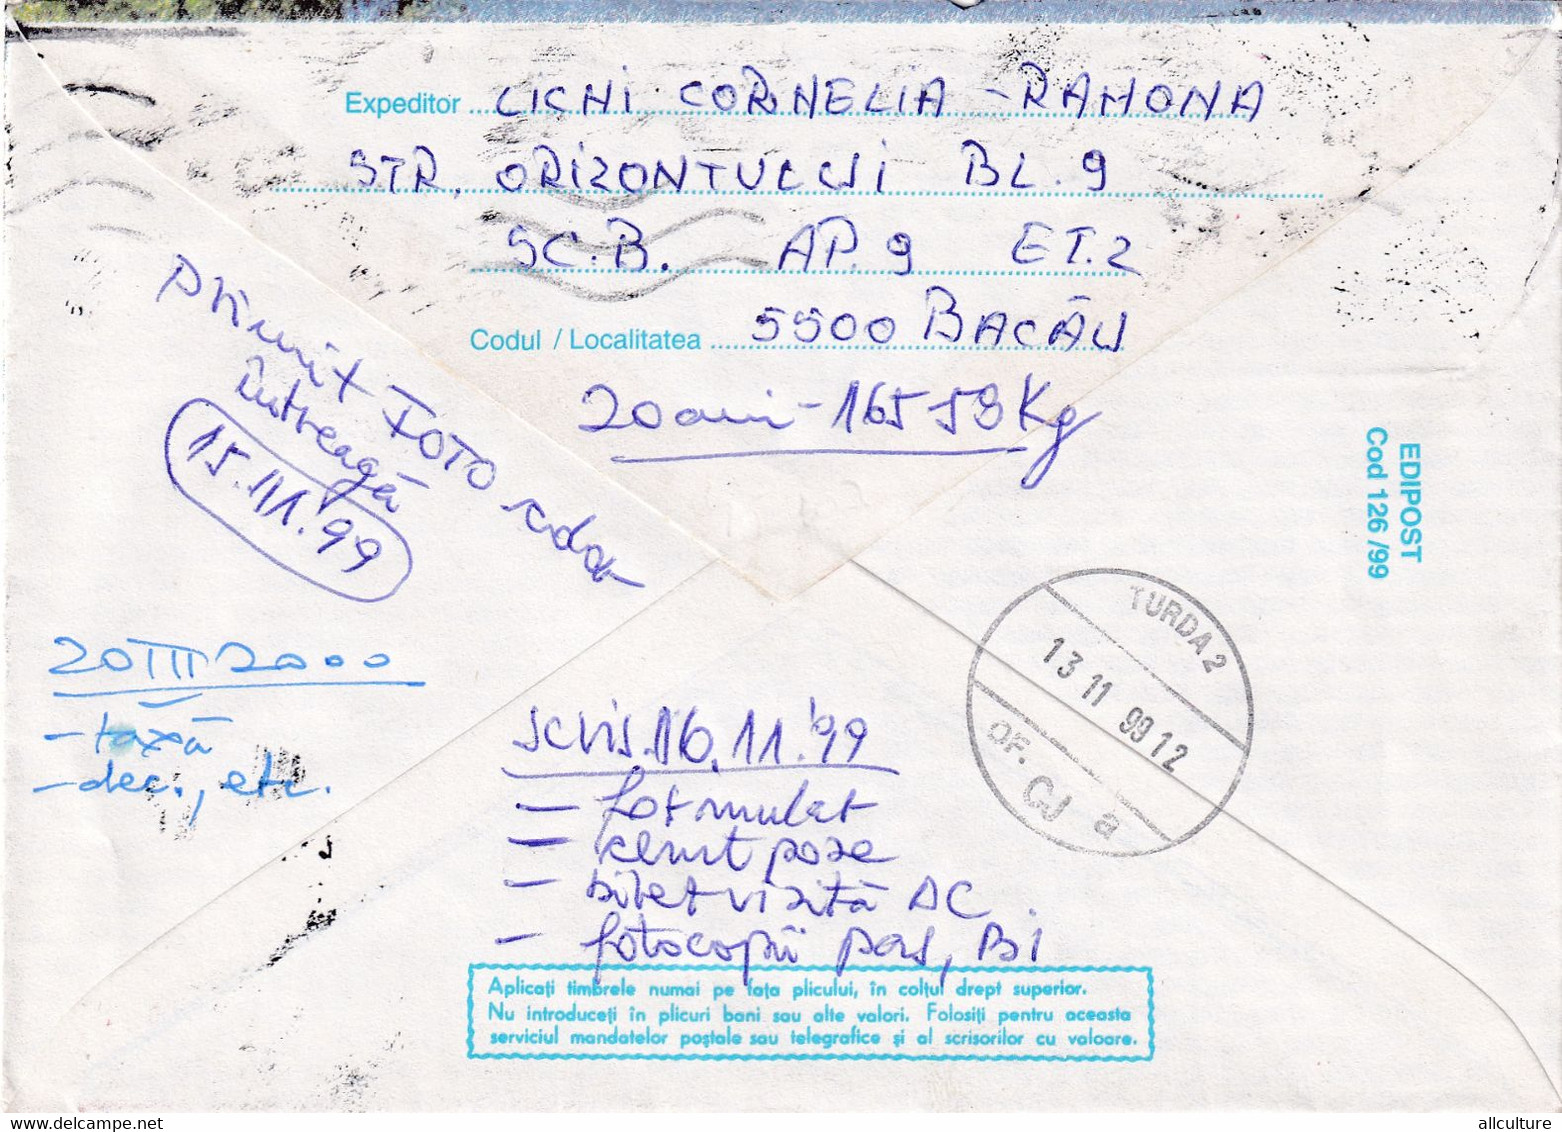 A9649- GORJ ROMANIA TOURISM ACTIVITIES SAILLING VESSELS, ROMANIAN POSTAGE USED STAMP COVER STATIONERY BACAU 1999 - Barcos